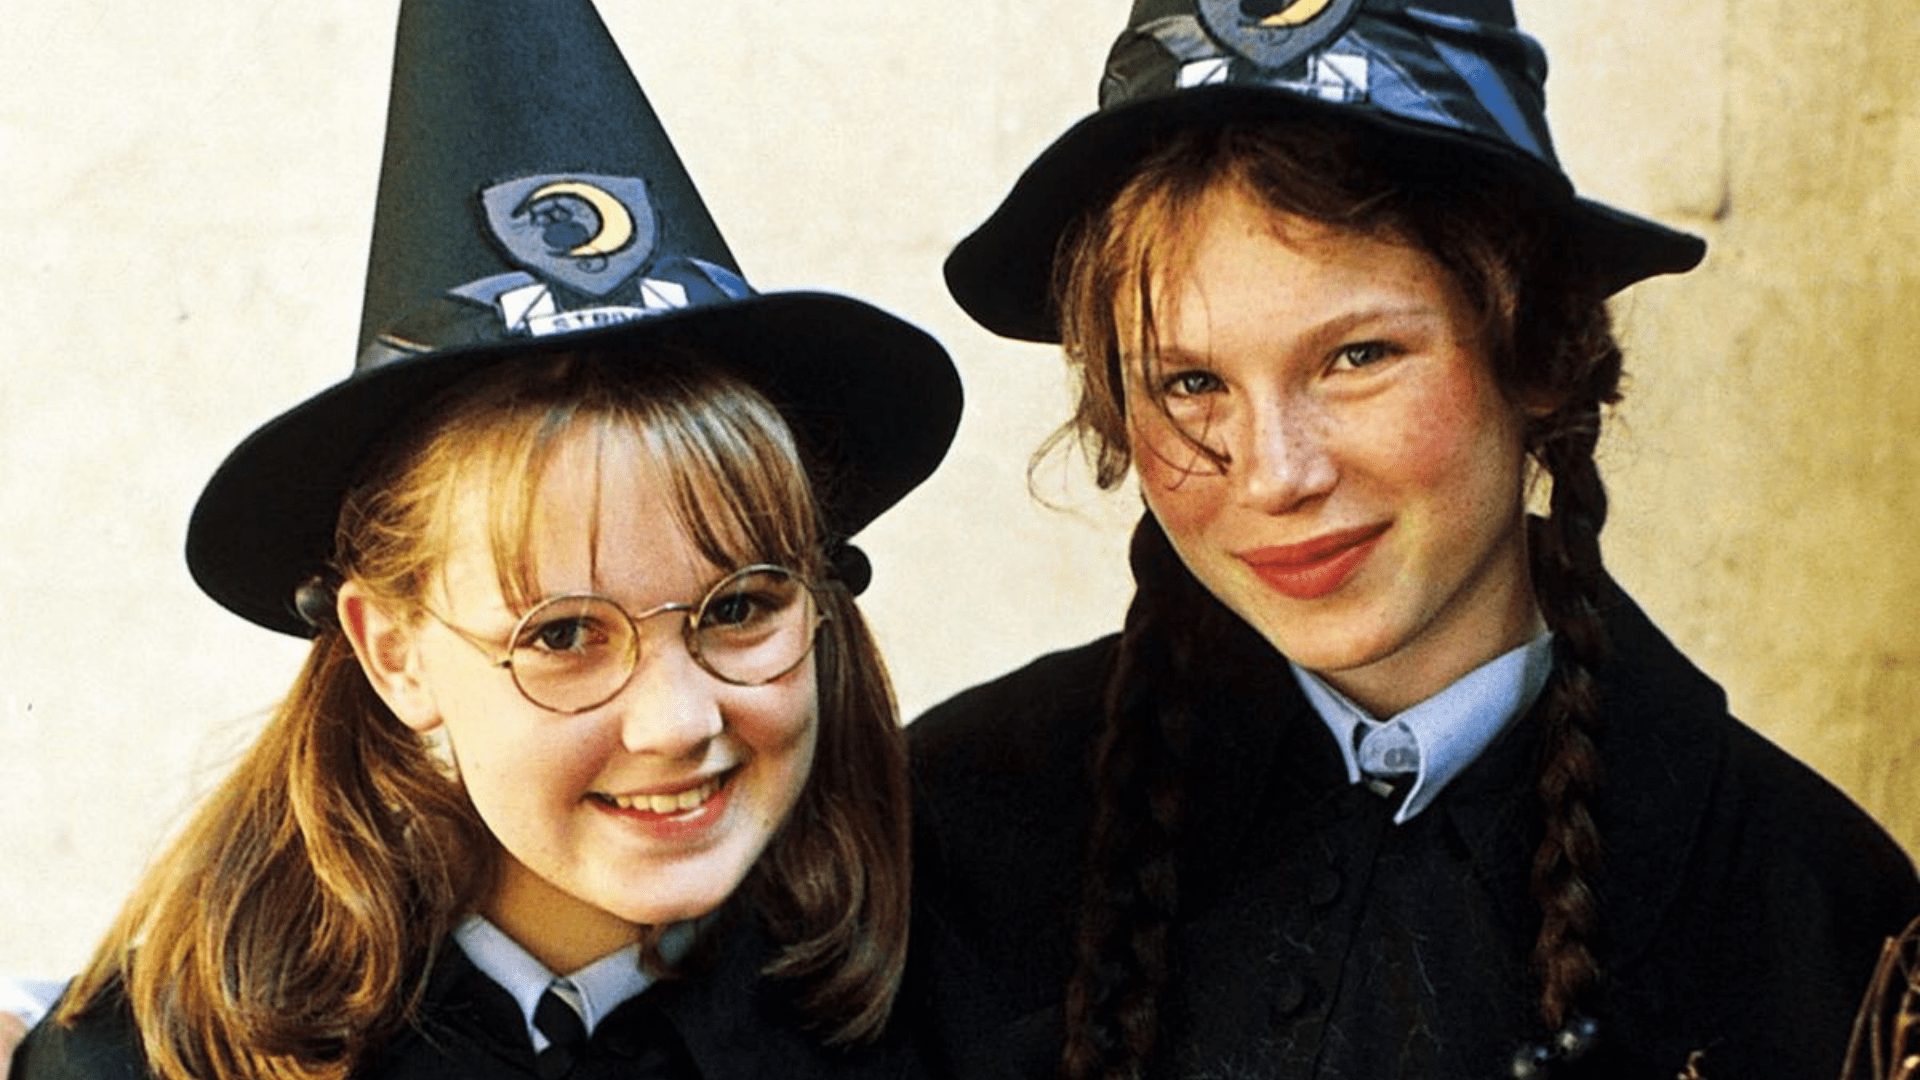 The Worst Witch Facts - The Worst Witch Facts Every 1990s Kid Should Know